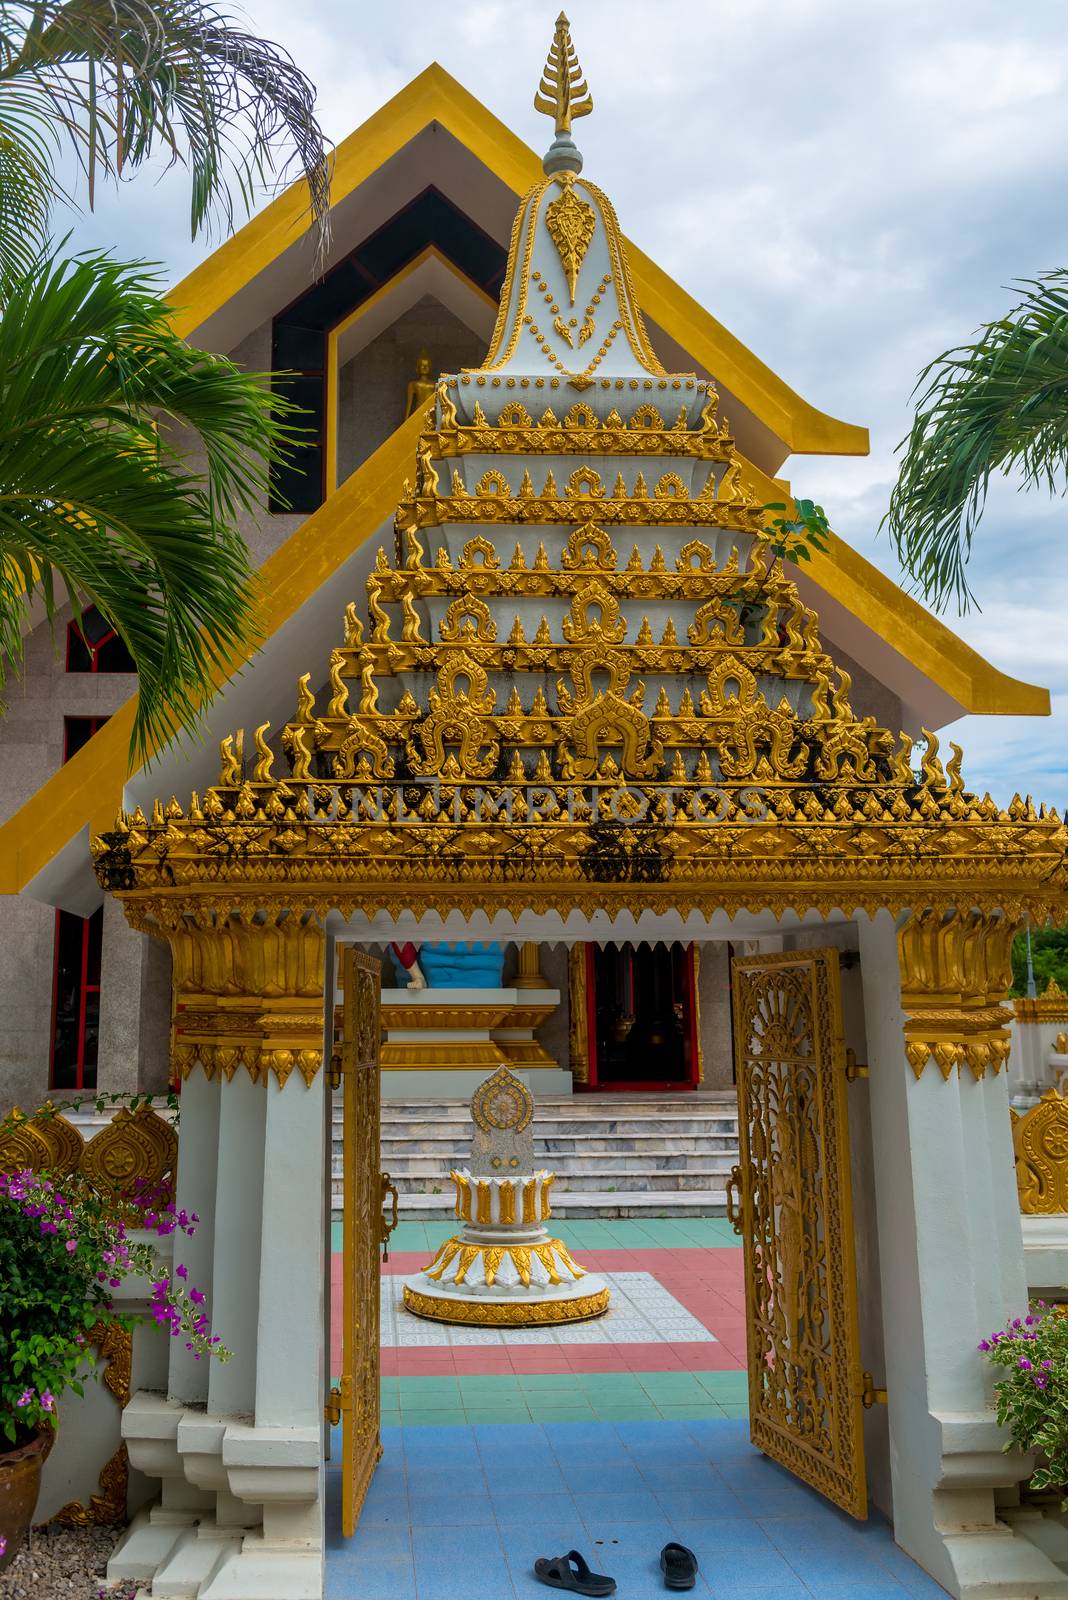 beautiful temple in Thailand, entrance and a pair of shoes by kosmsos111